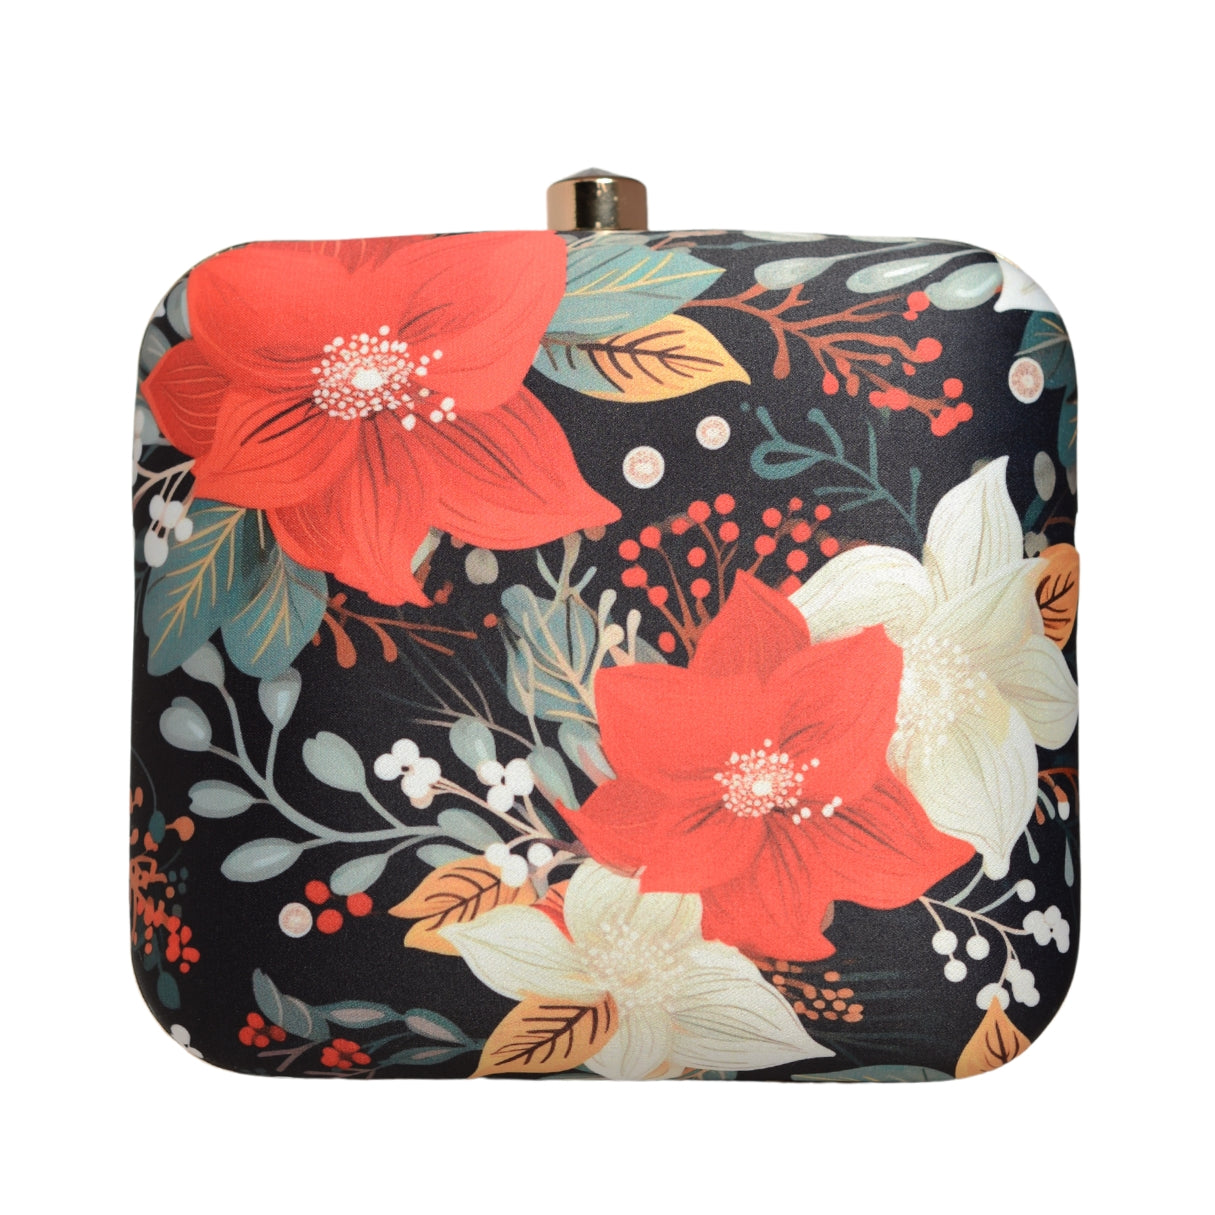 Red and White Floral Printed Clutch